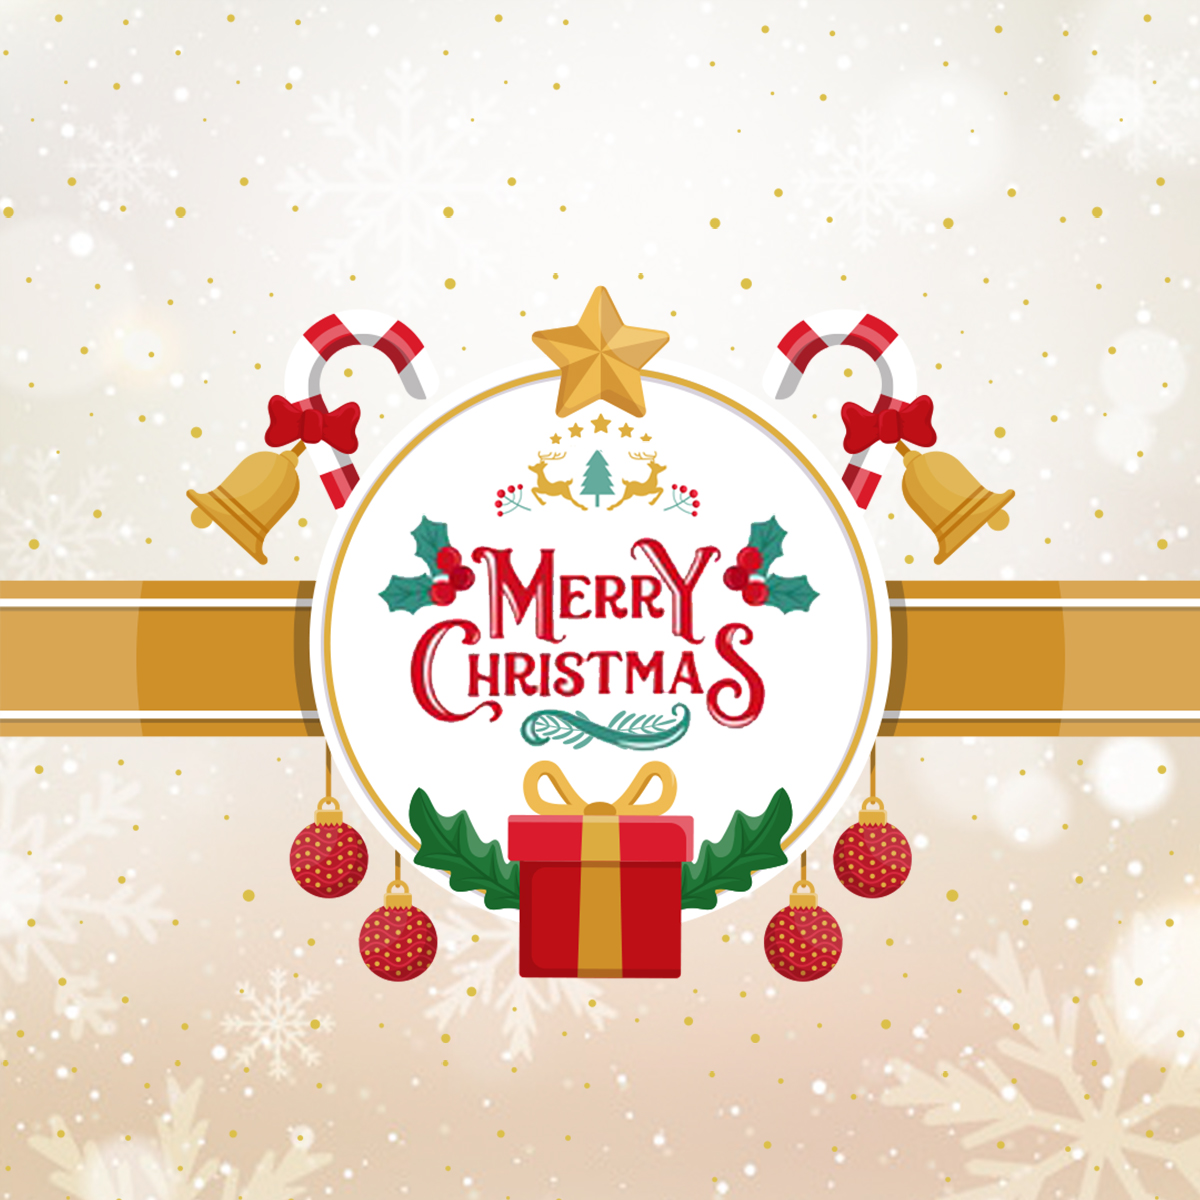 Details 100 christmas banner background hd - Abzlocal.mx